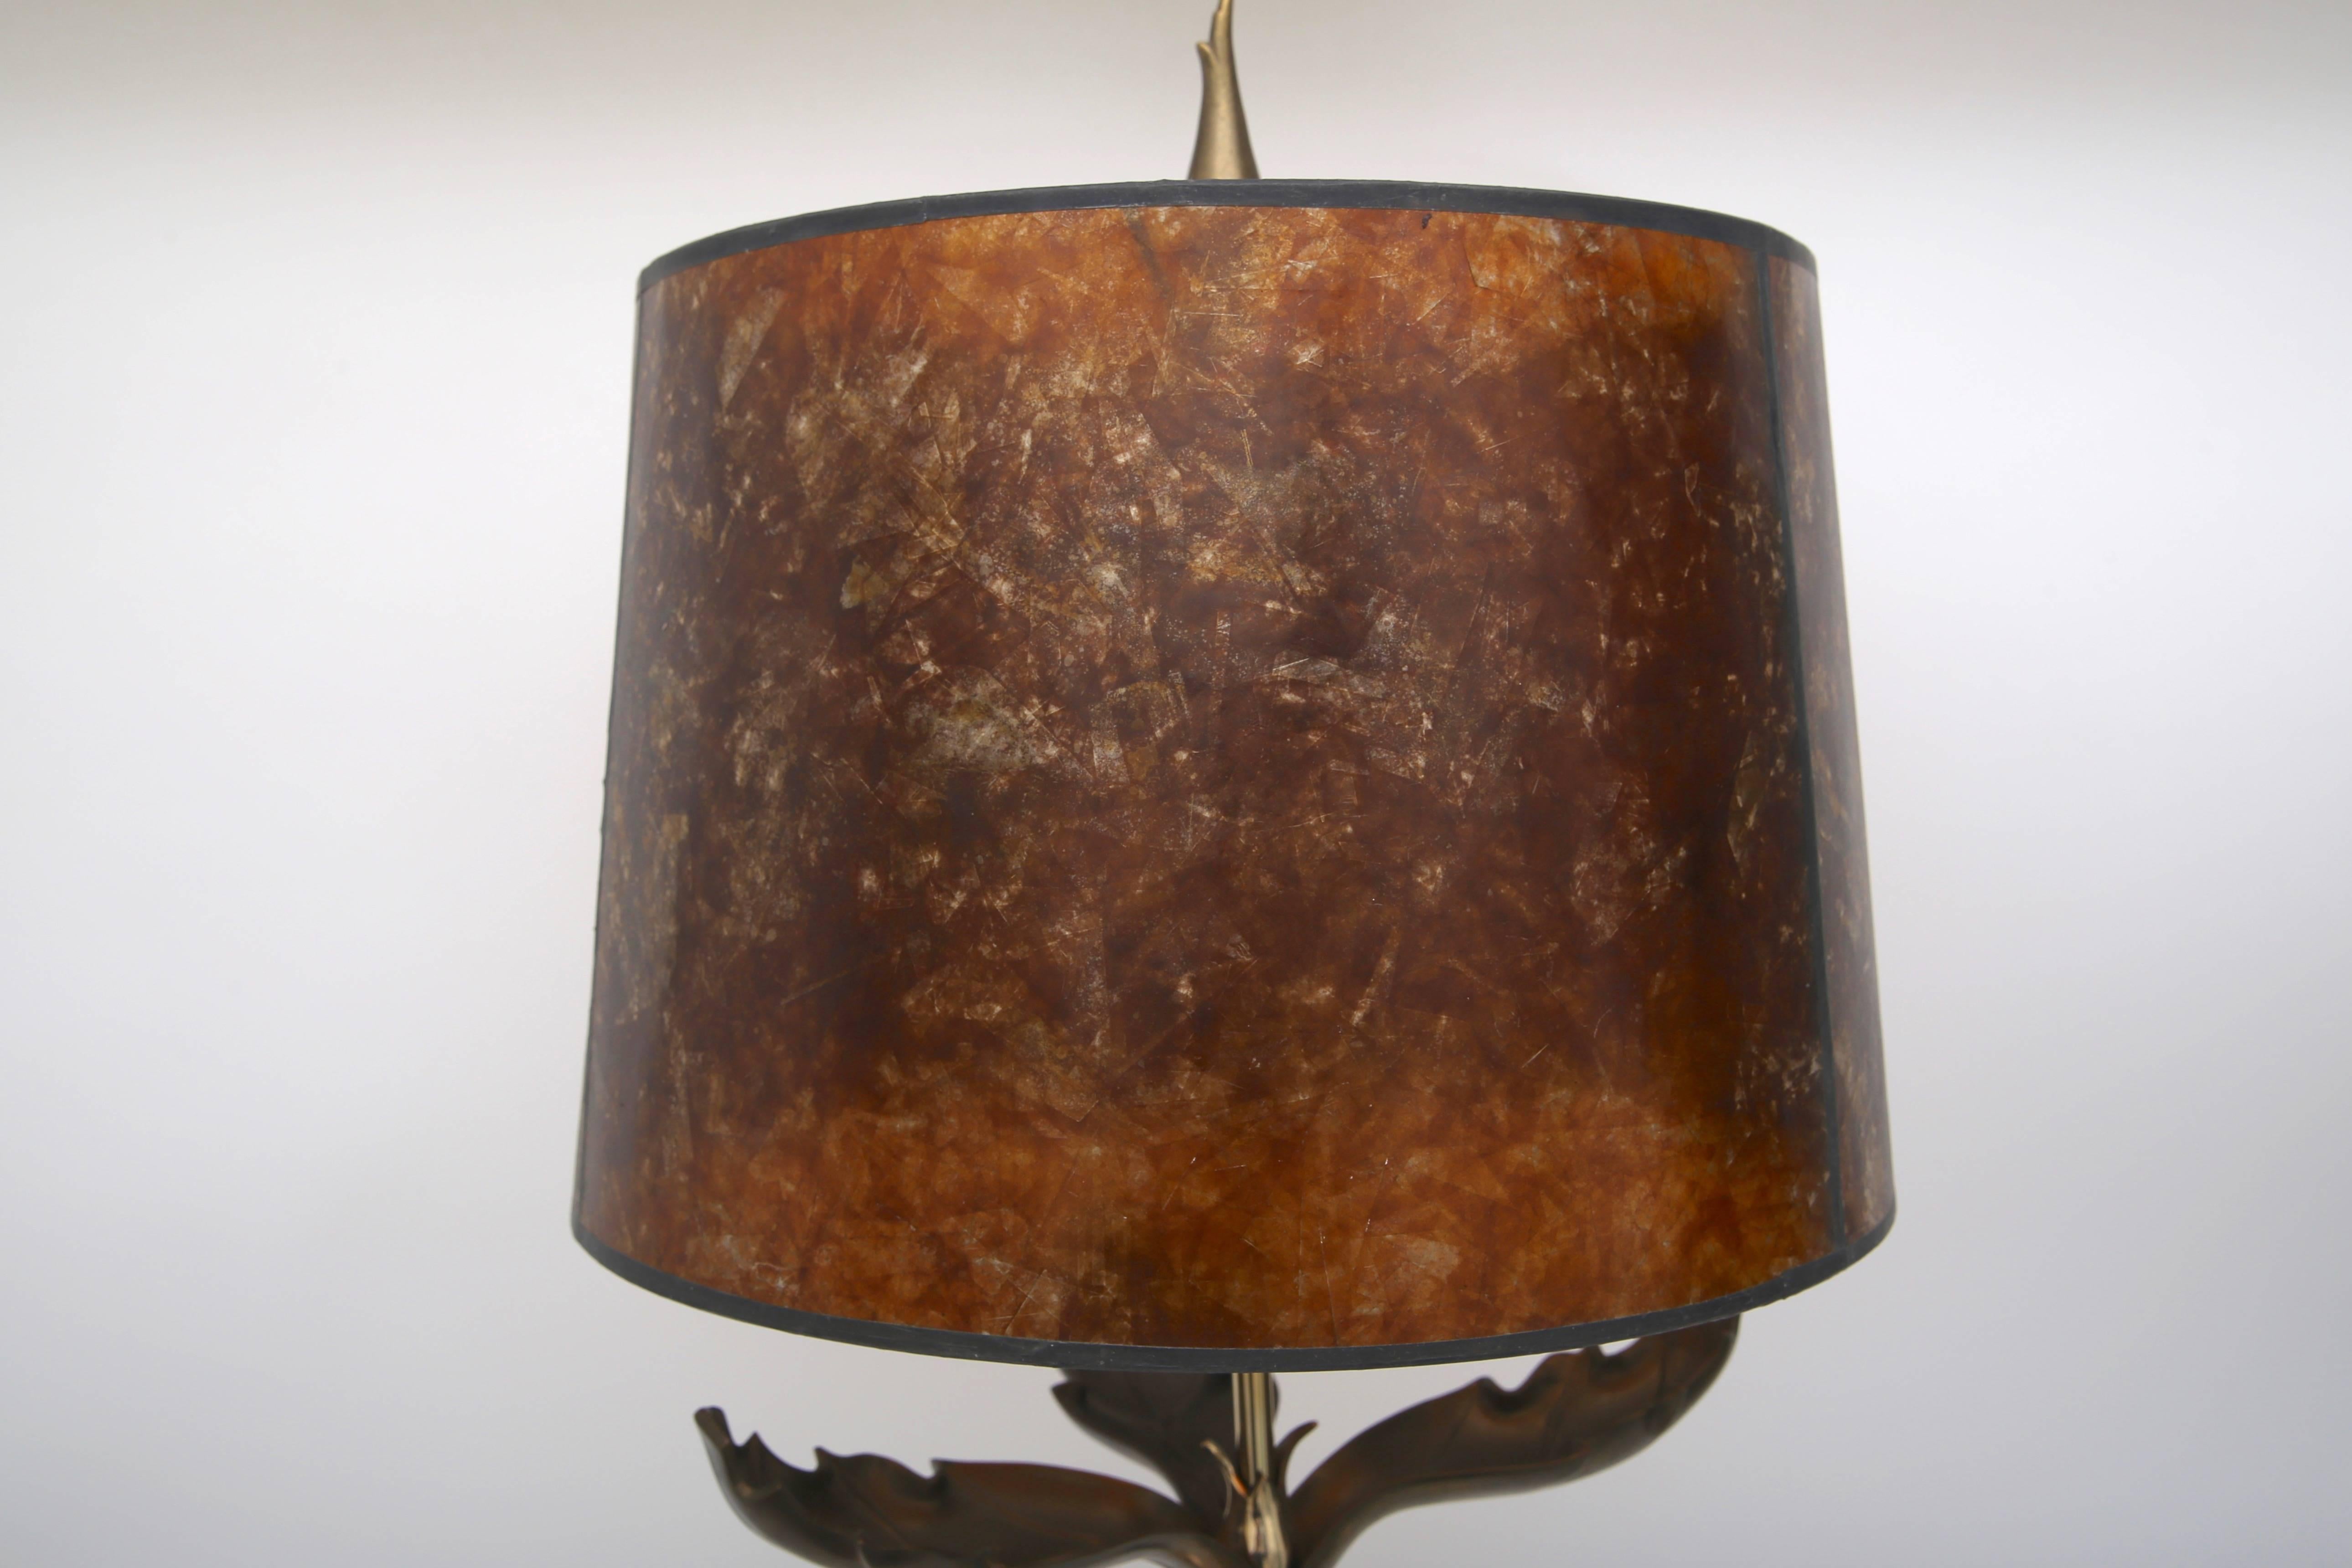 This piece is very much in the style of lamps by Chapman Manufacturing company and dates to the late 1970s or early 1980s.

Note: This piece has been professionally restored with new wiring, polished and lacquered metal and a new mica